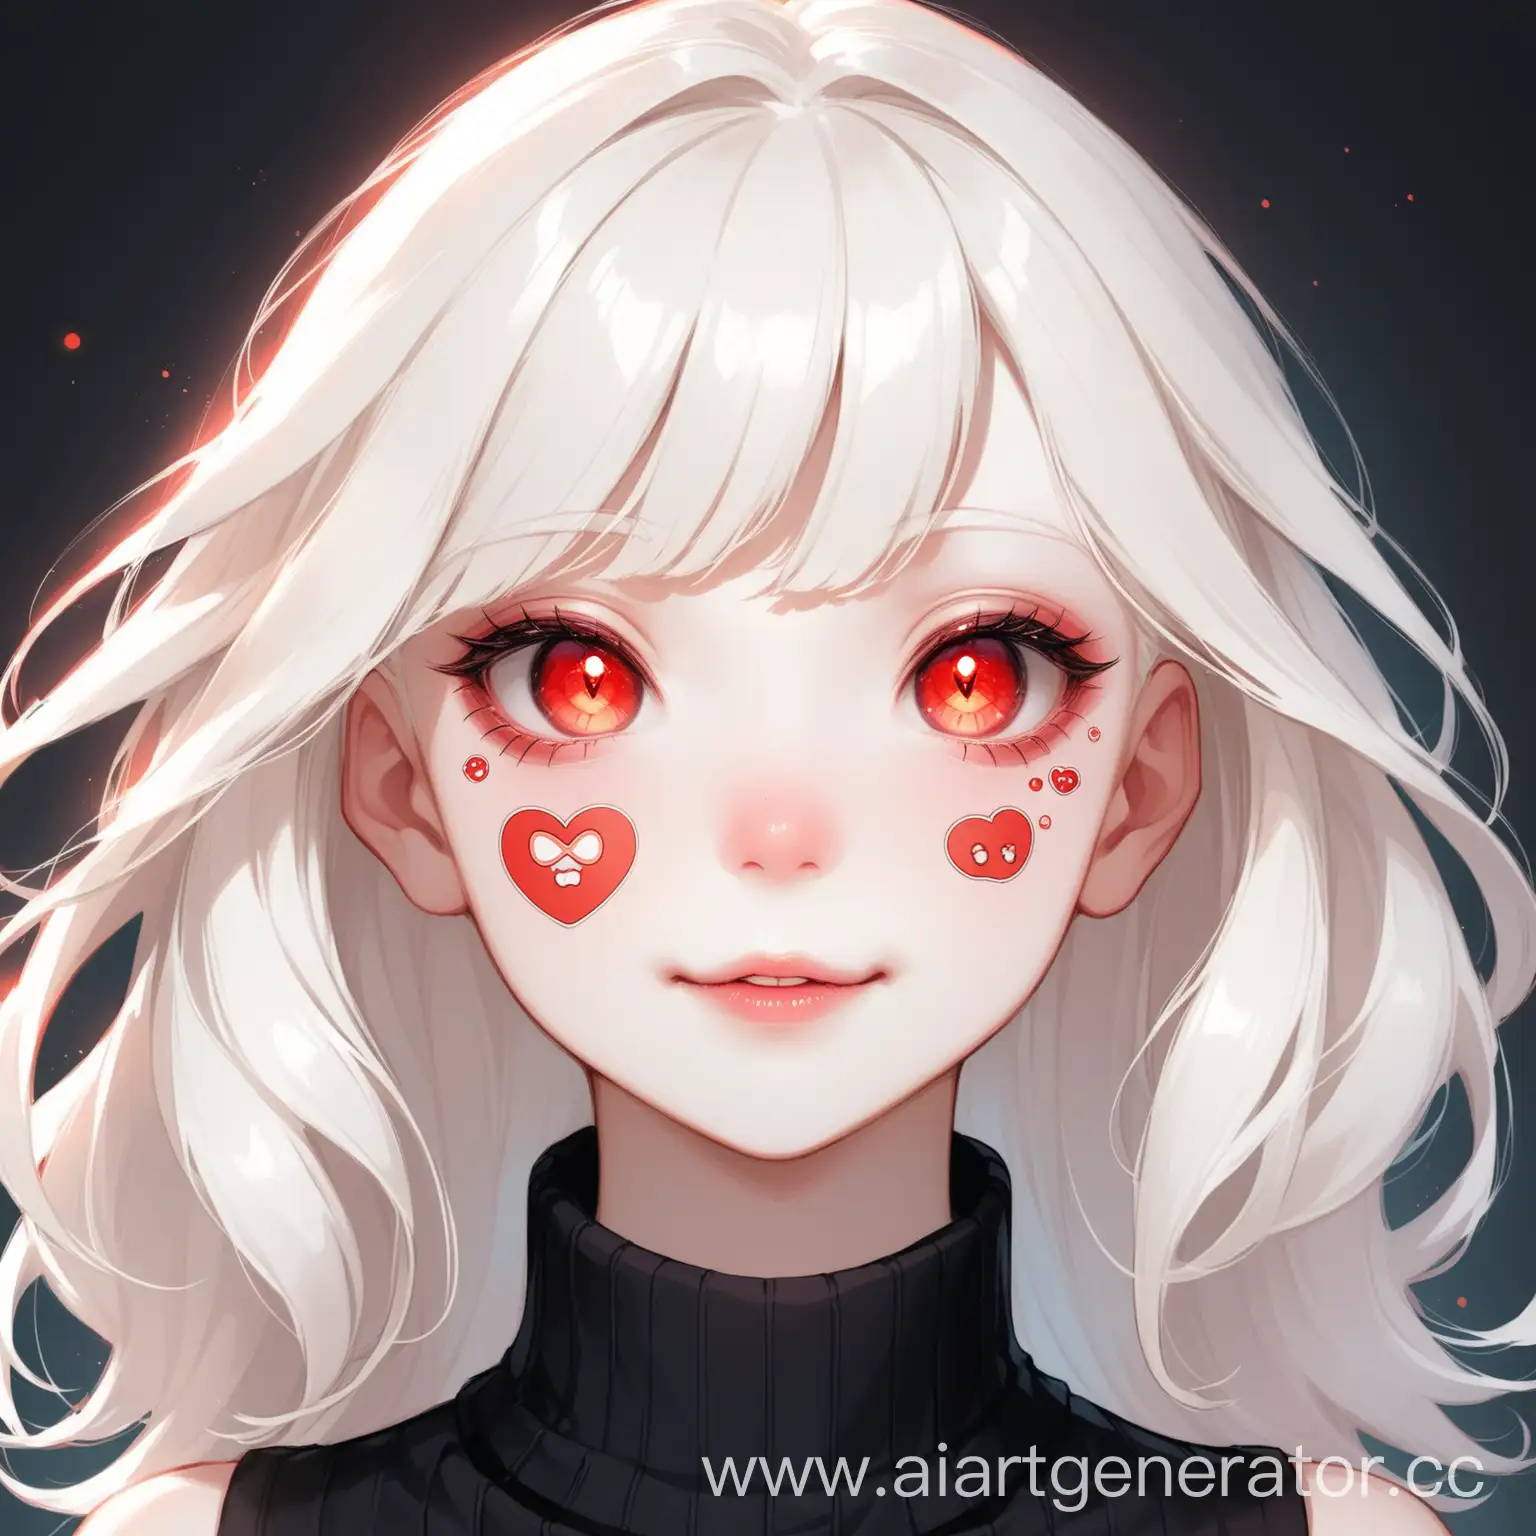 Albino-Teen-Girl-with-Unique-Makeup-and-Cute-Stickers